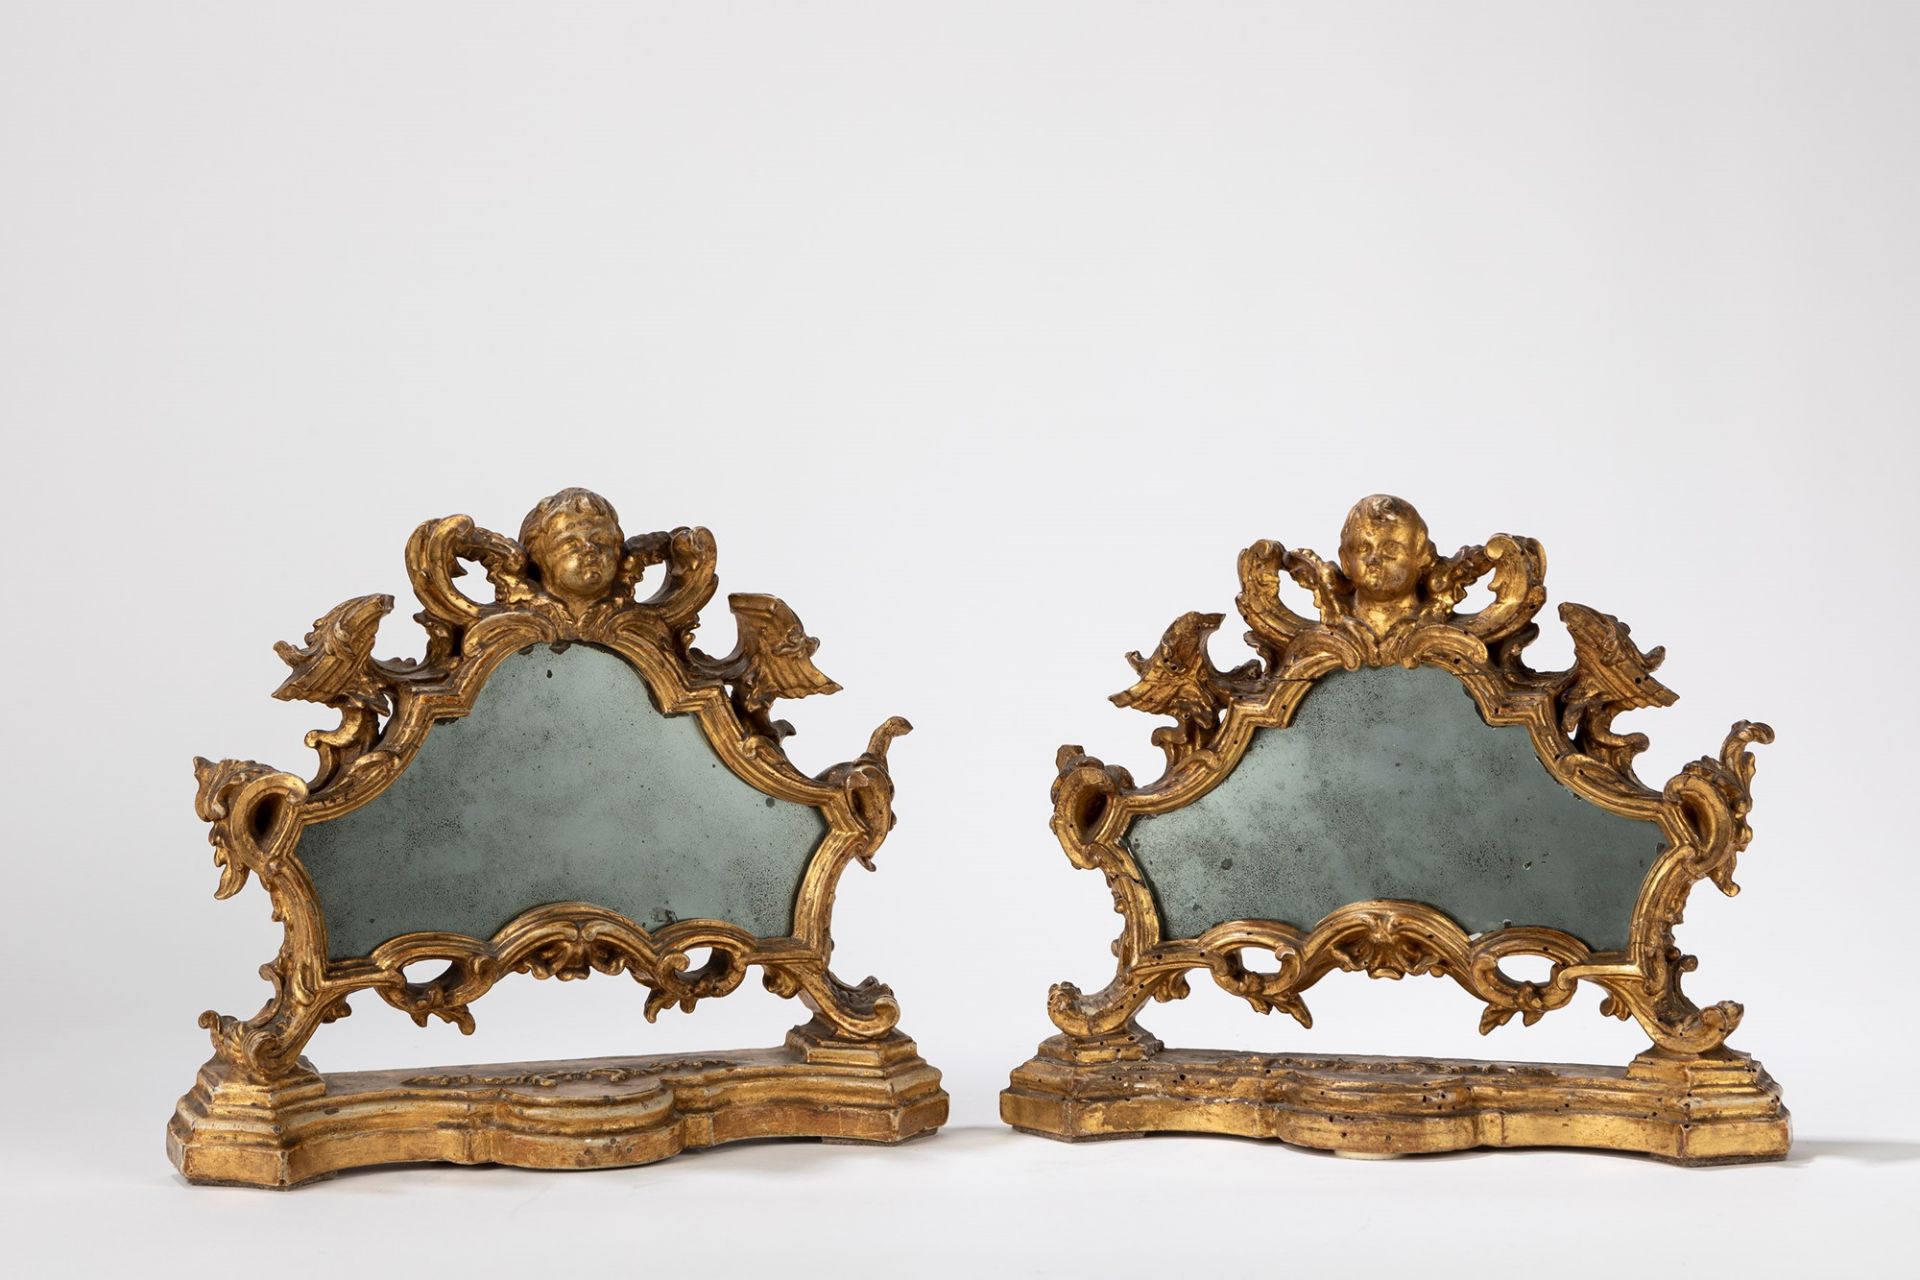 A pair of carved and gilt wood cartaglorias, mounted with mirrors